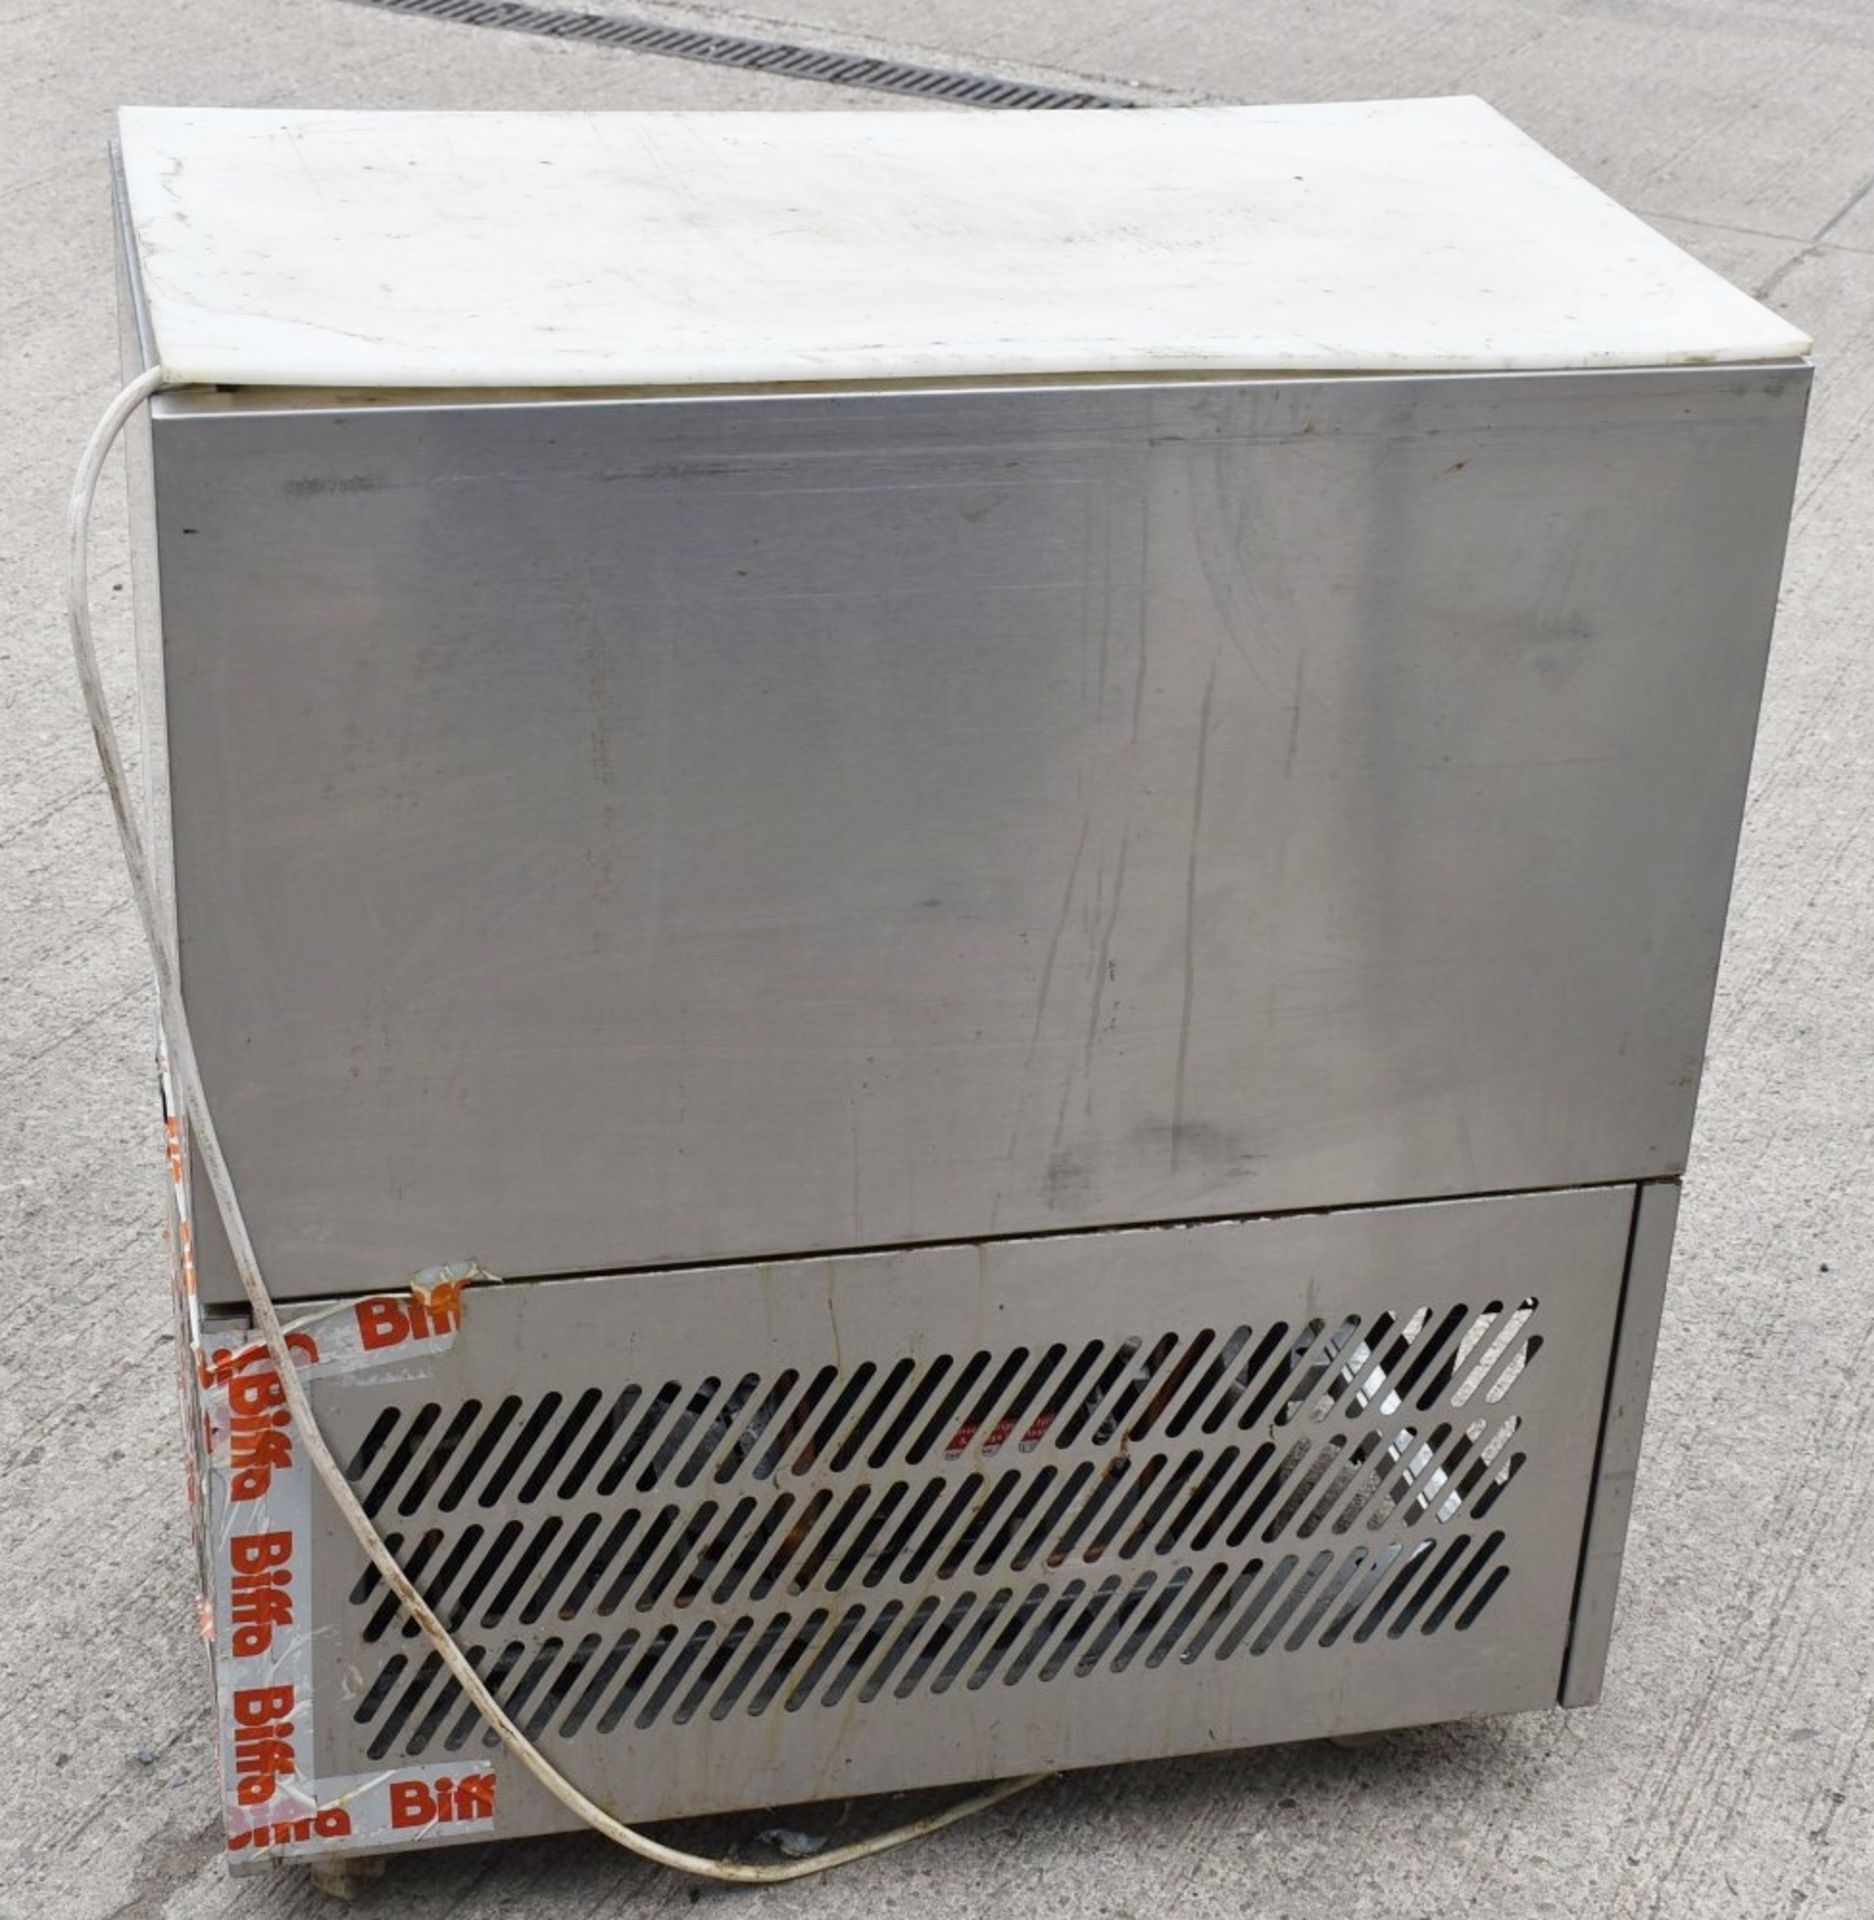 1 x Williams PW4 Refrigerated Prep Well With Prep Lid Cover - Dimensions: H88 x W77 x D45cms - Image 3 of 8